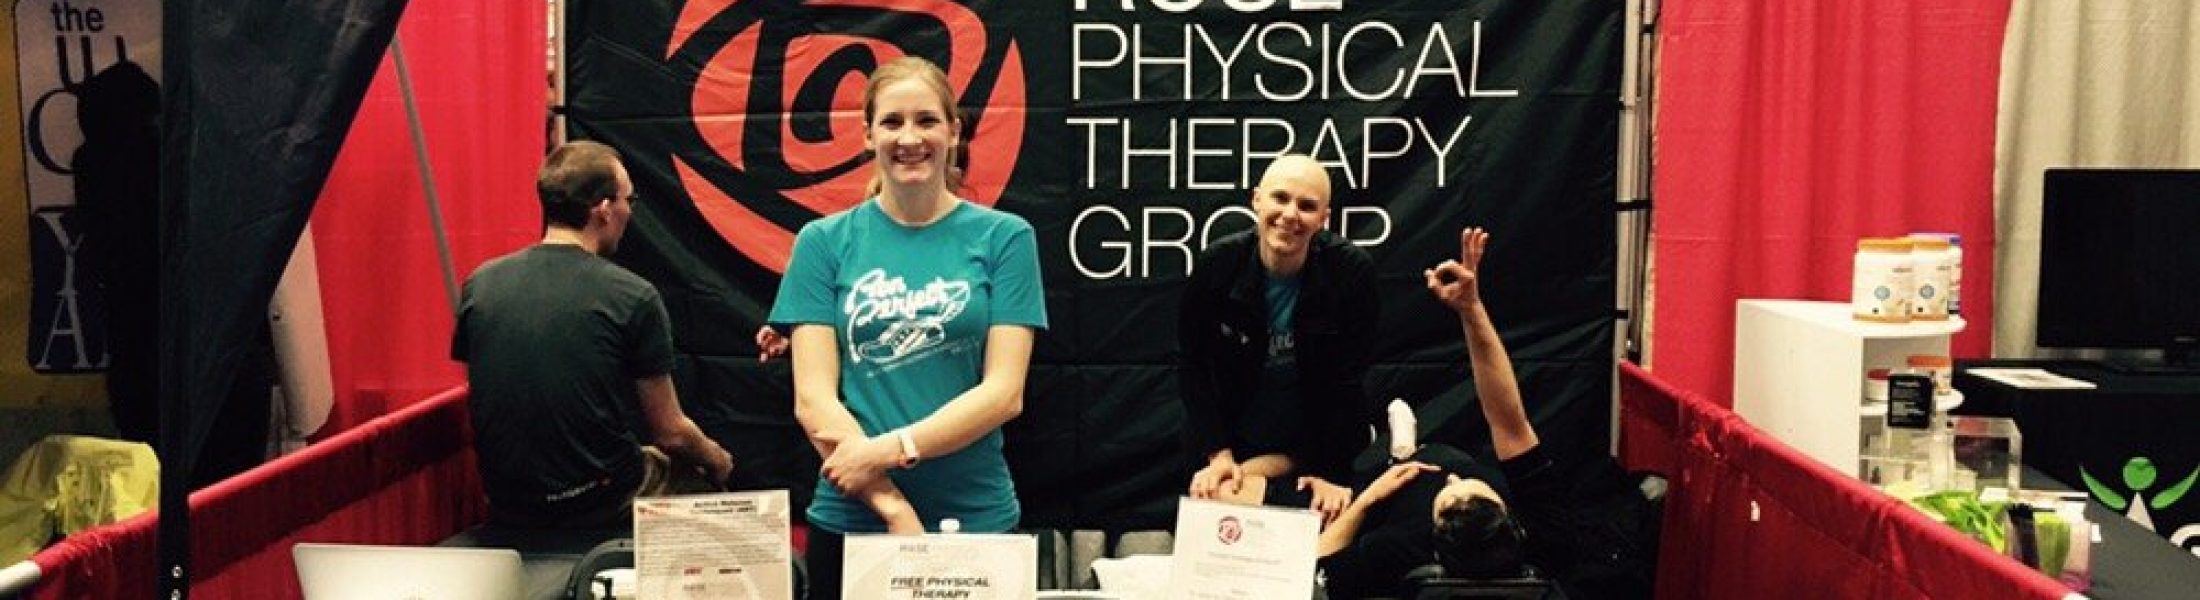 Texas Physical Therapy Association